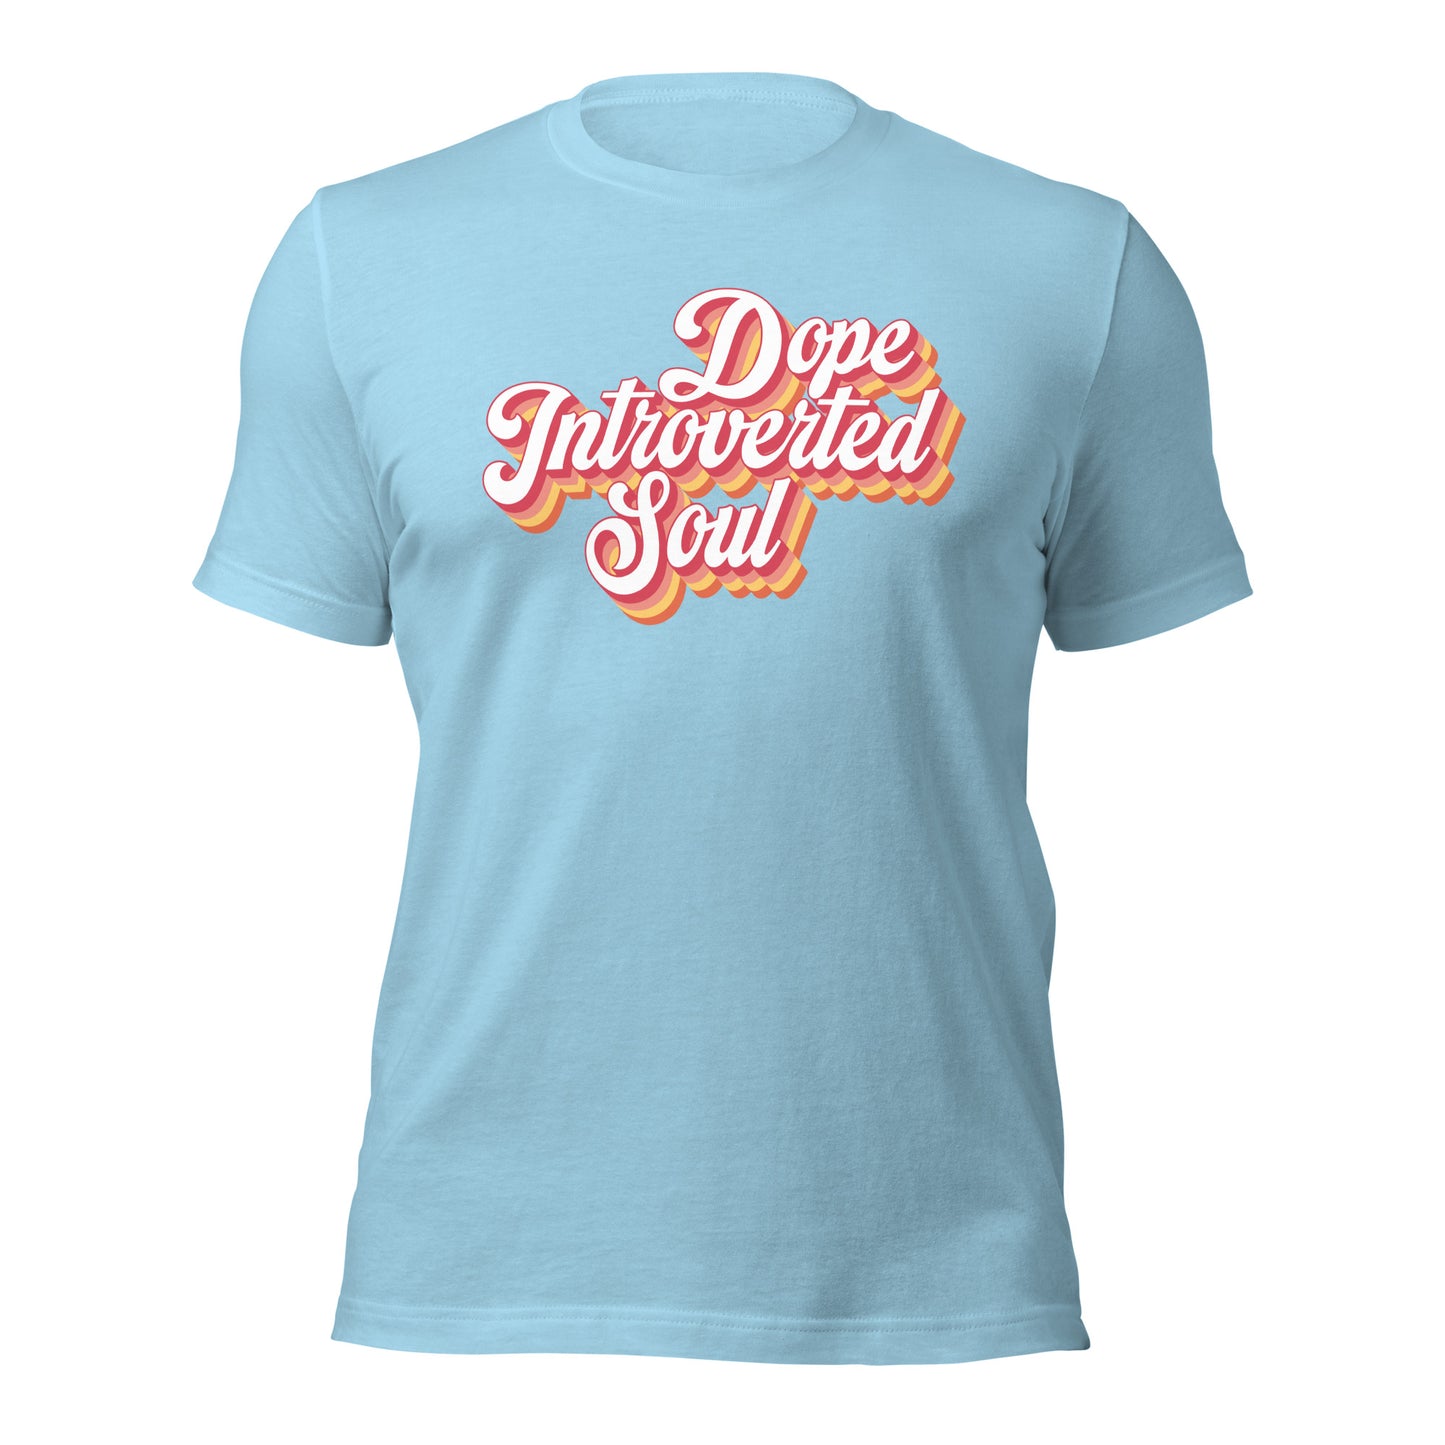 Dope Introverted Soul T-shirt